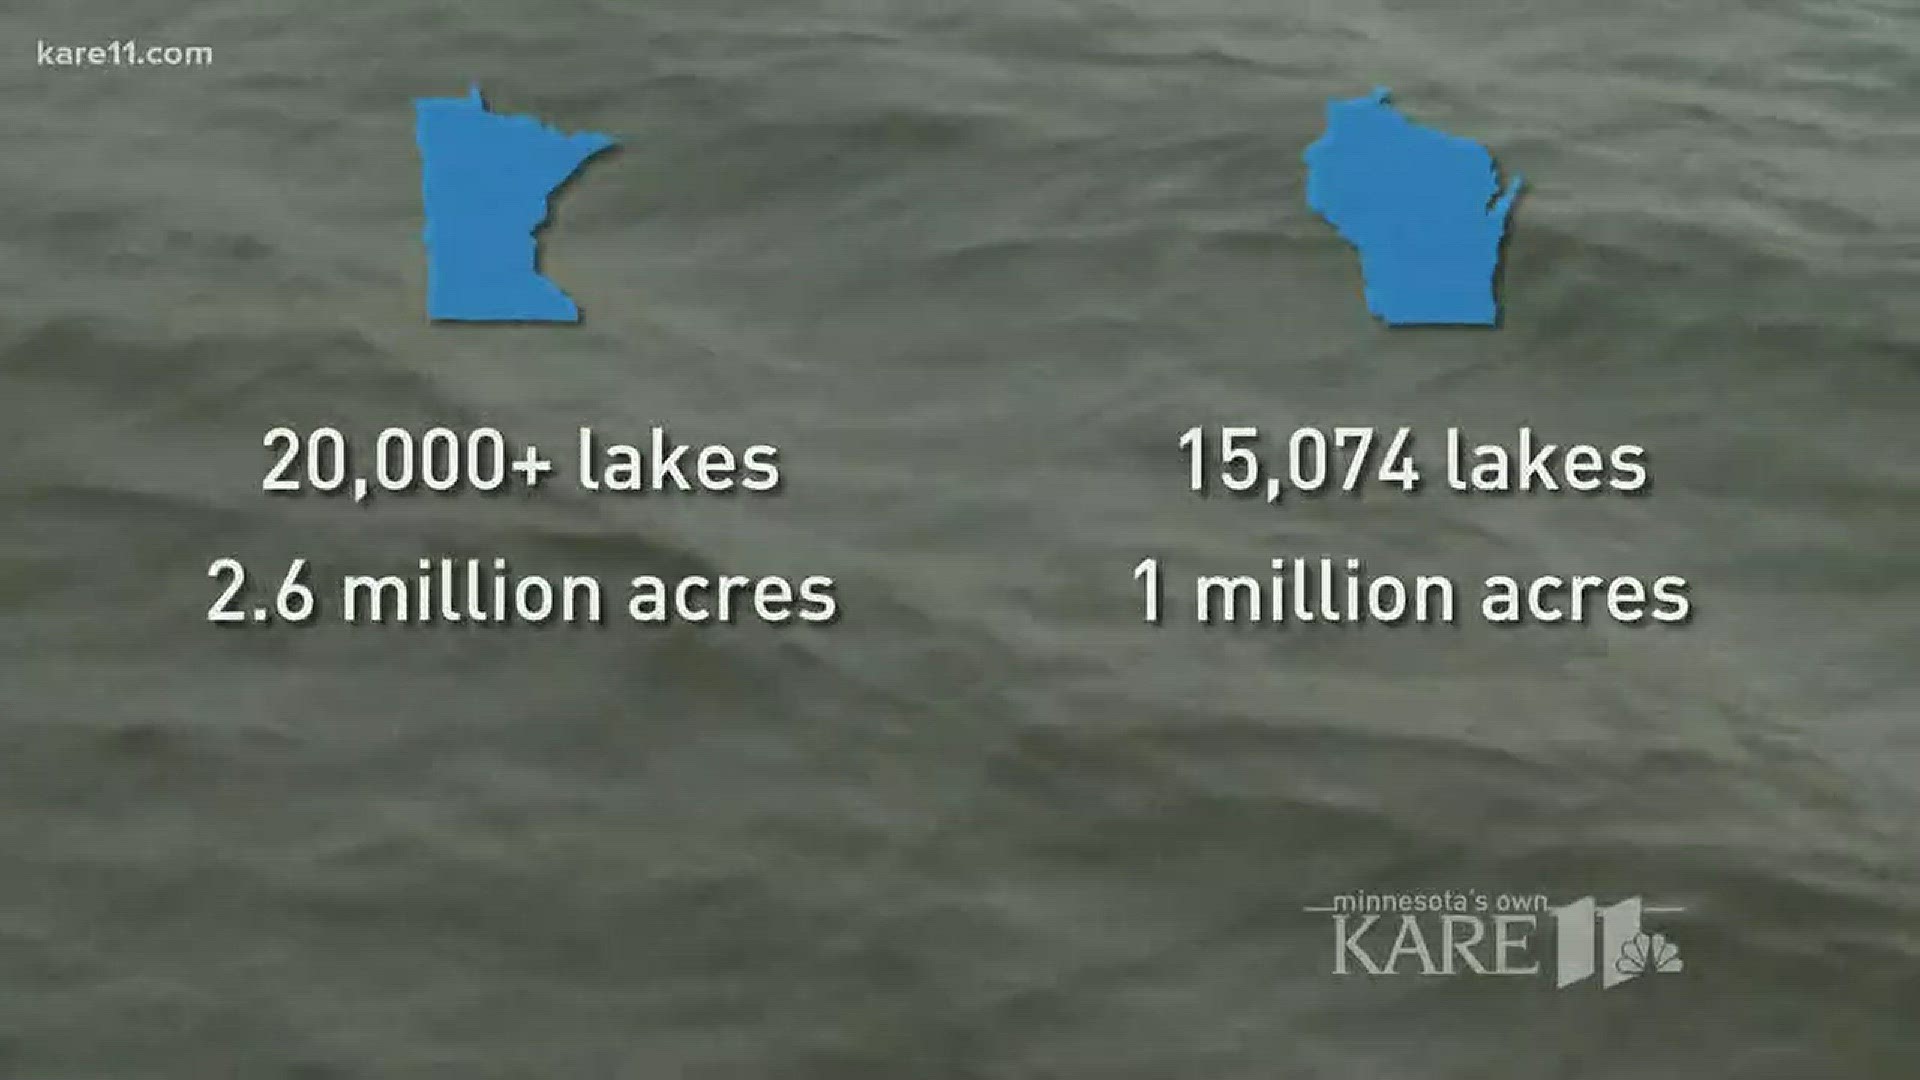 Minnesota takes pride in hockey, hot dish and all things purple, though we're perhaps best known for our 10,000 Lakes. But does Minnesota really have more lakes than our neighbors in Wisconsin? http://kare11.tv/2z7IYKH